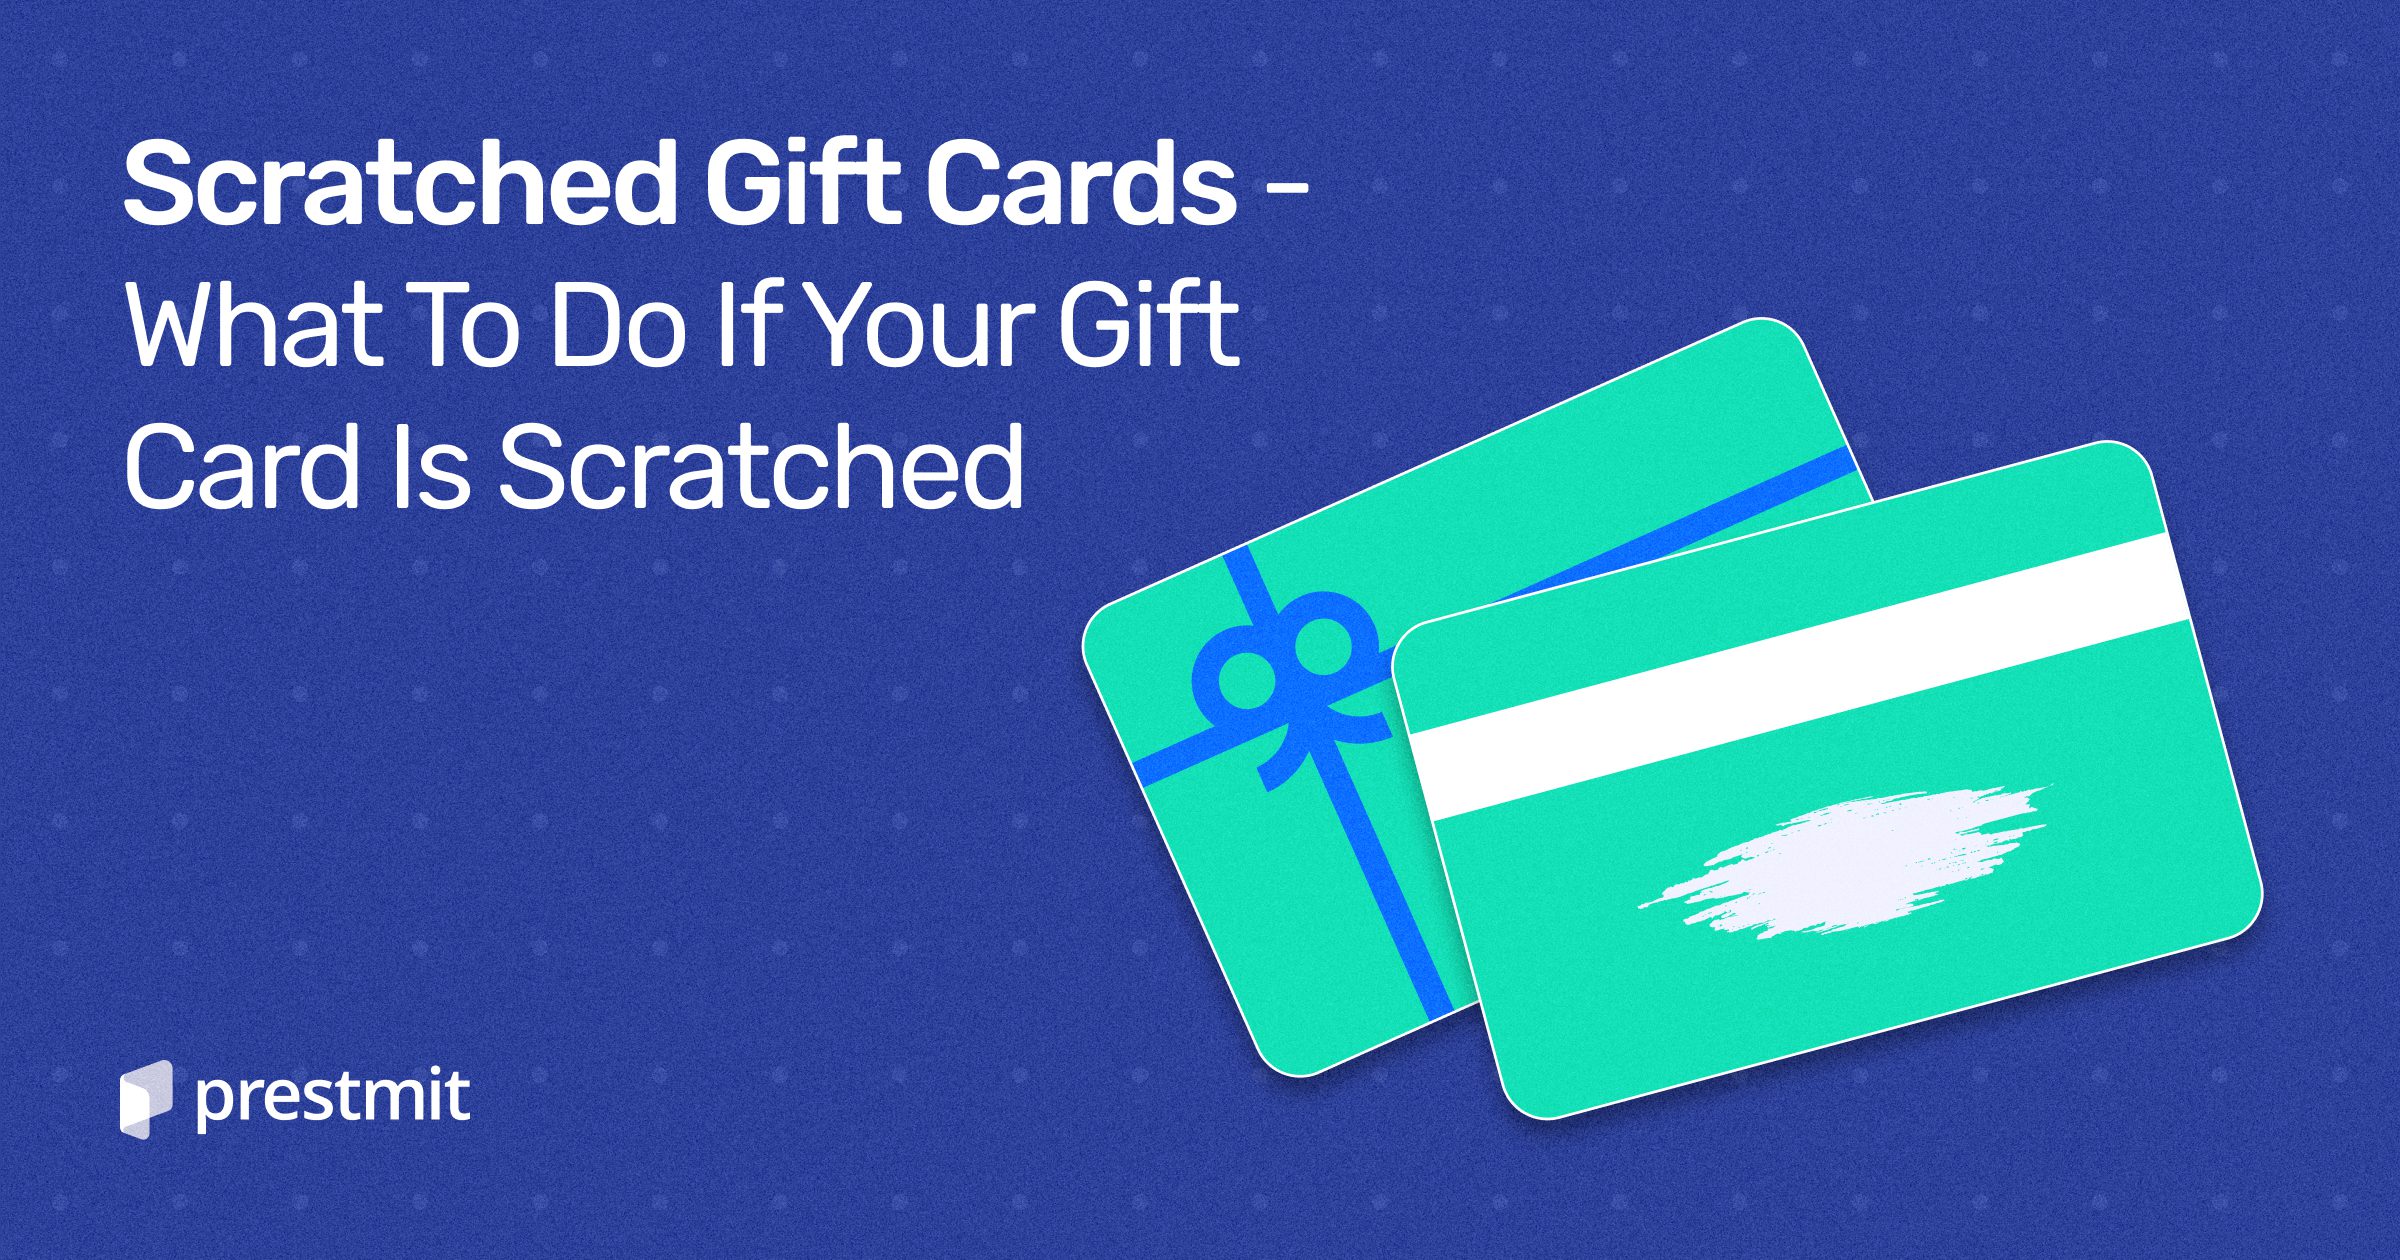 Scratched Gift Cards: What to Do if Your Gift Card is Scratched